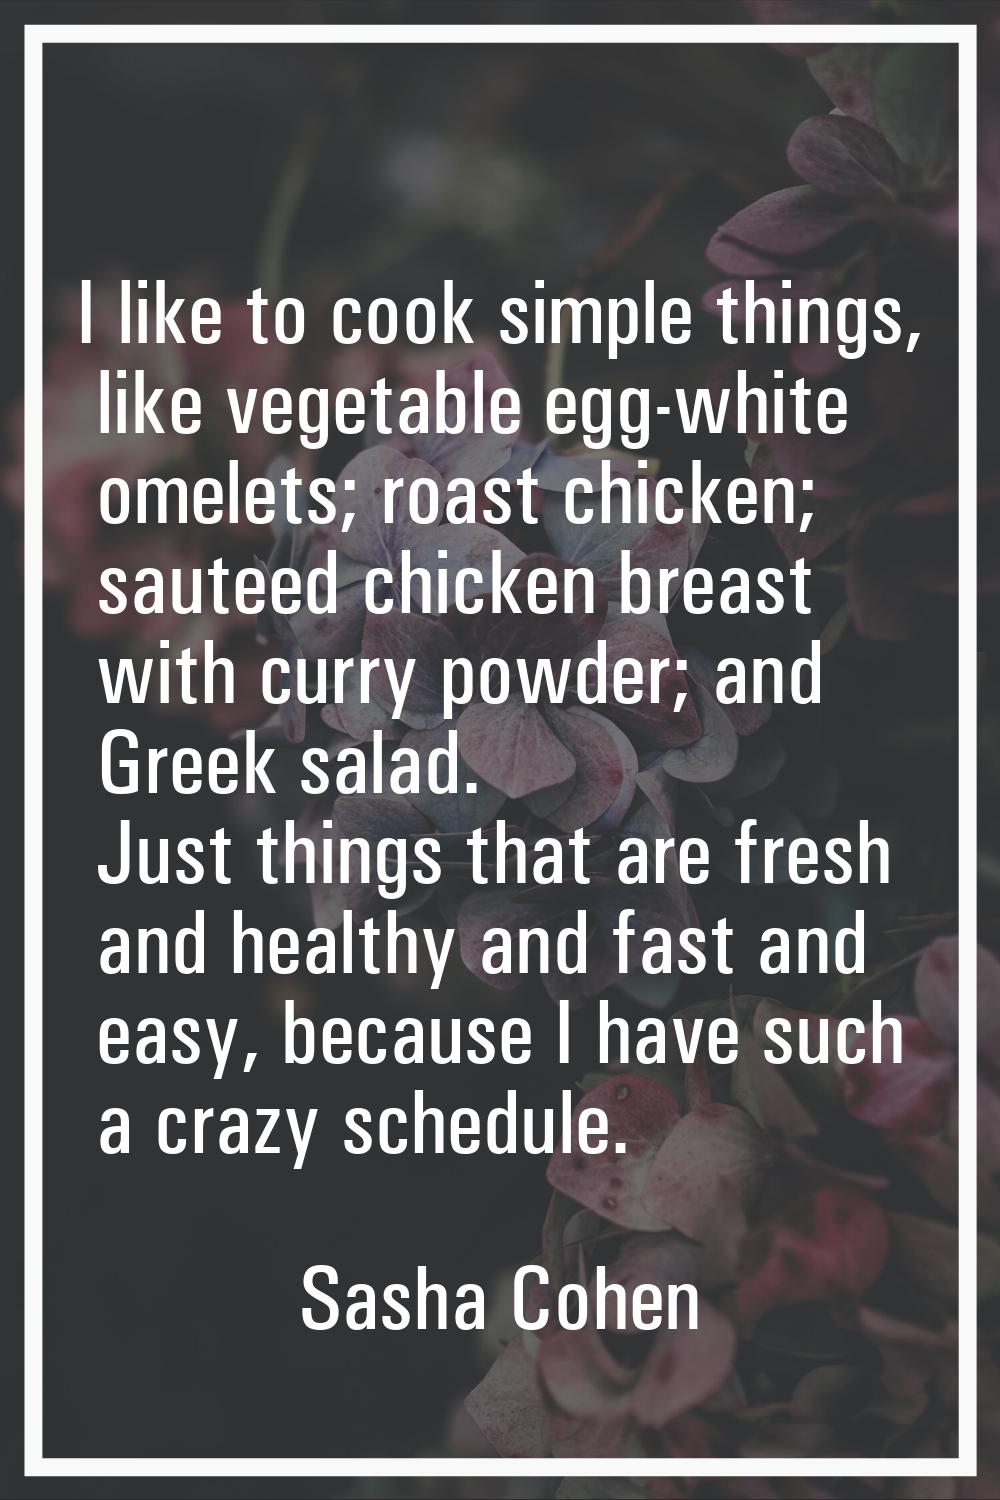 I like to cook simple things, like vegetable egg-white omelets; roast chicken; sauteed chicken brea